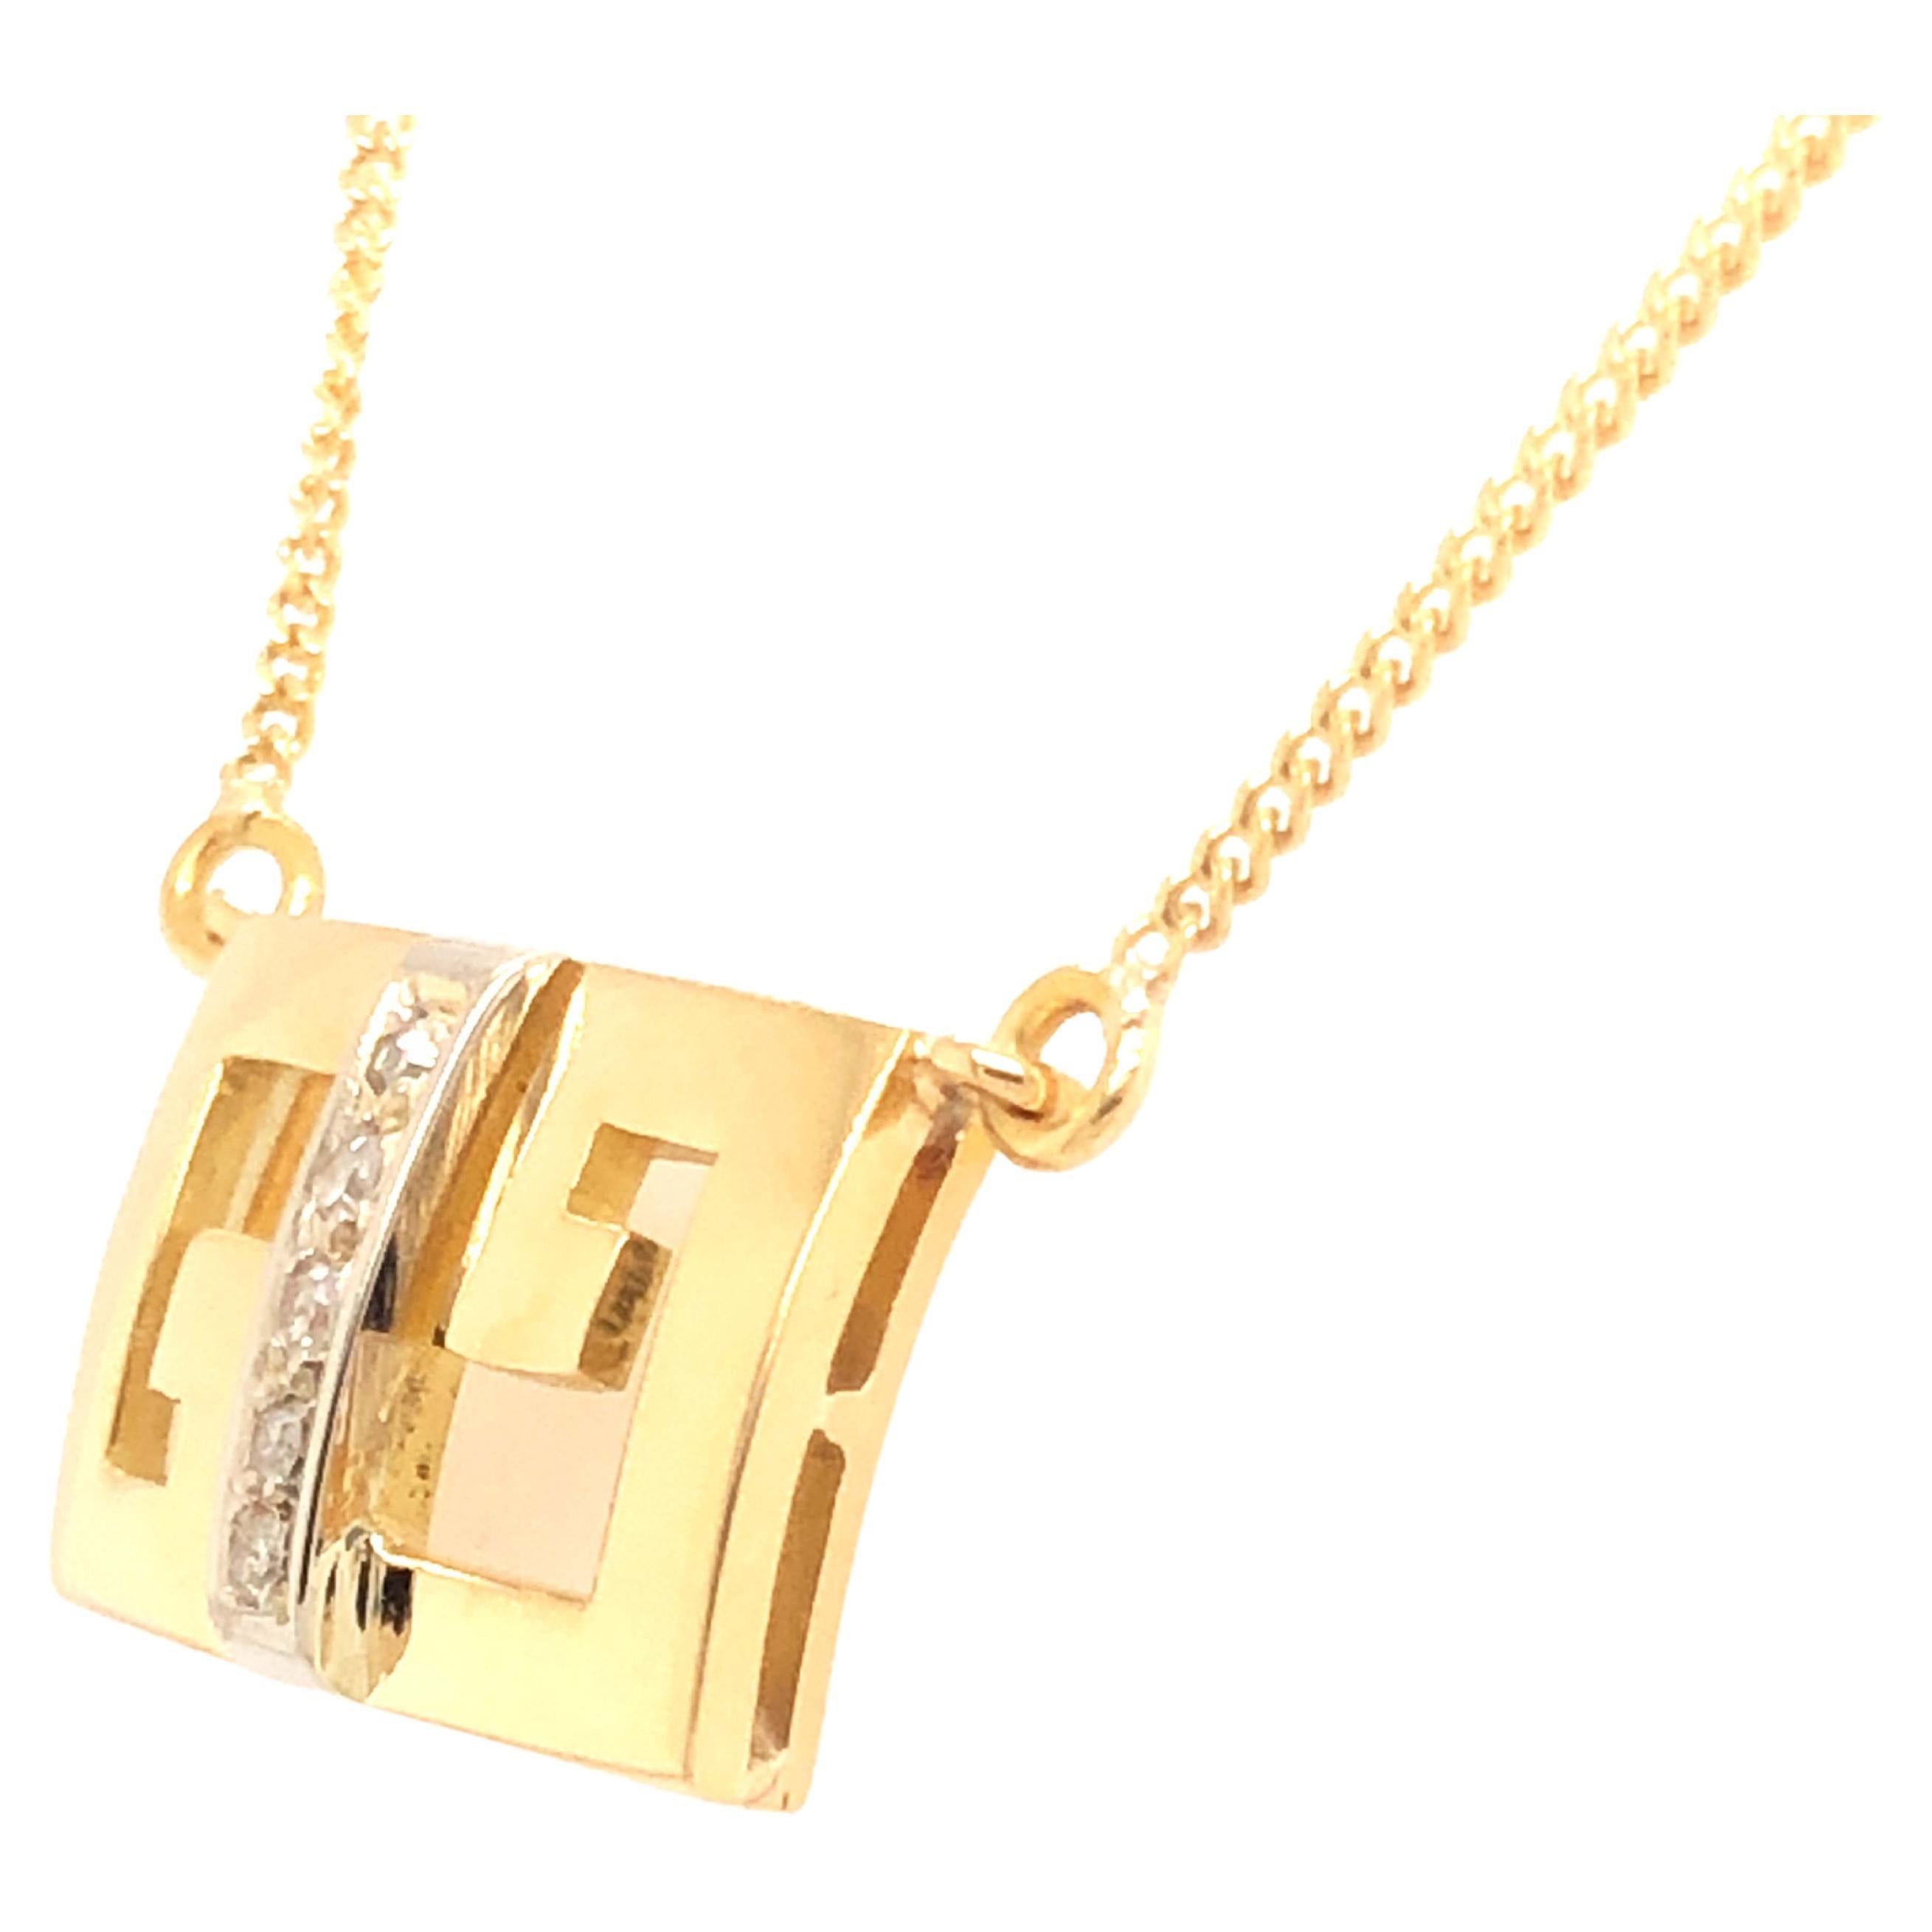 Vintage Gucci Logo Gold and Diamond Pendant with Chain, 18k Yellow Gold